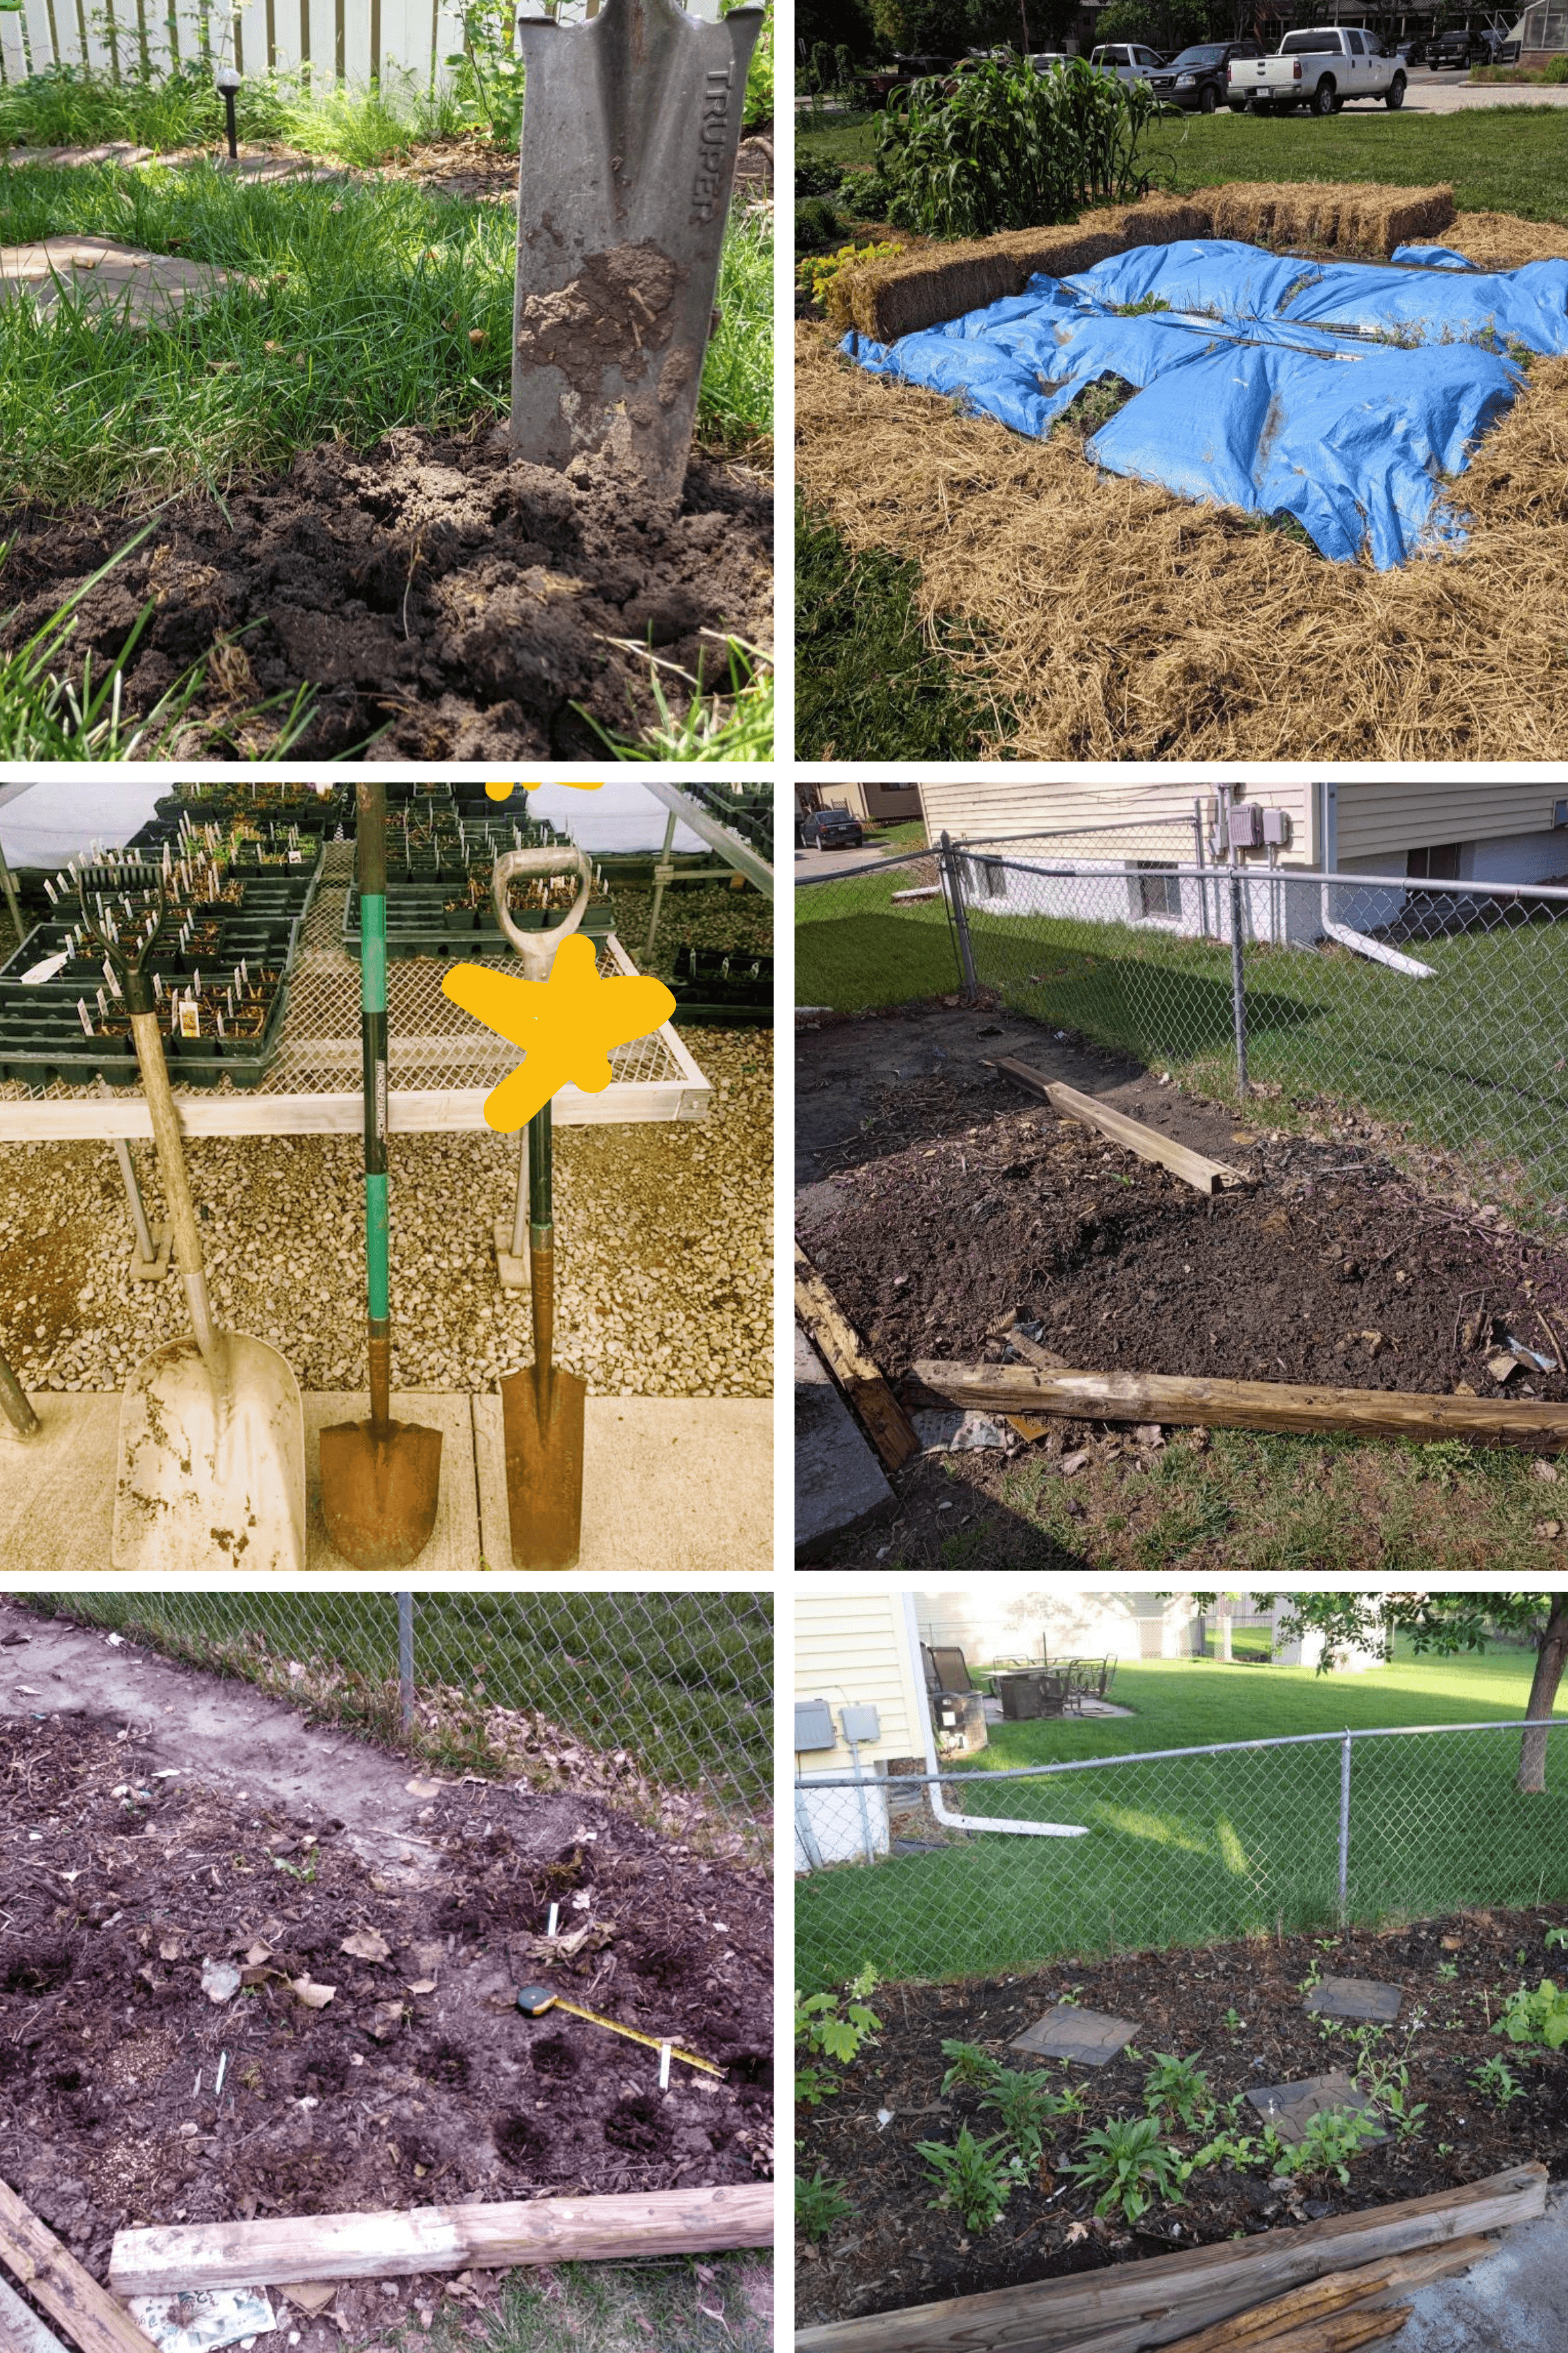 Photos demonstrating how to "chunk" up the soil with a shovel, solarize a garden to kill turf and weed seed with plastic tarps, the correct sharp shovel to use, and a garden with organic matter over cardboard over sod.